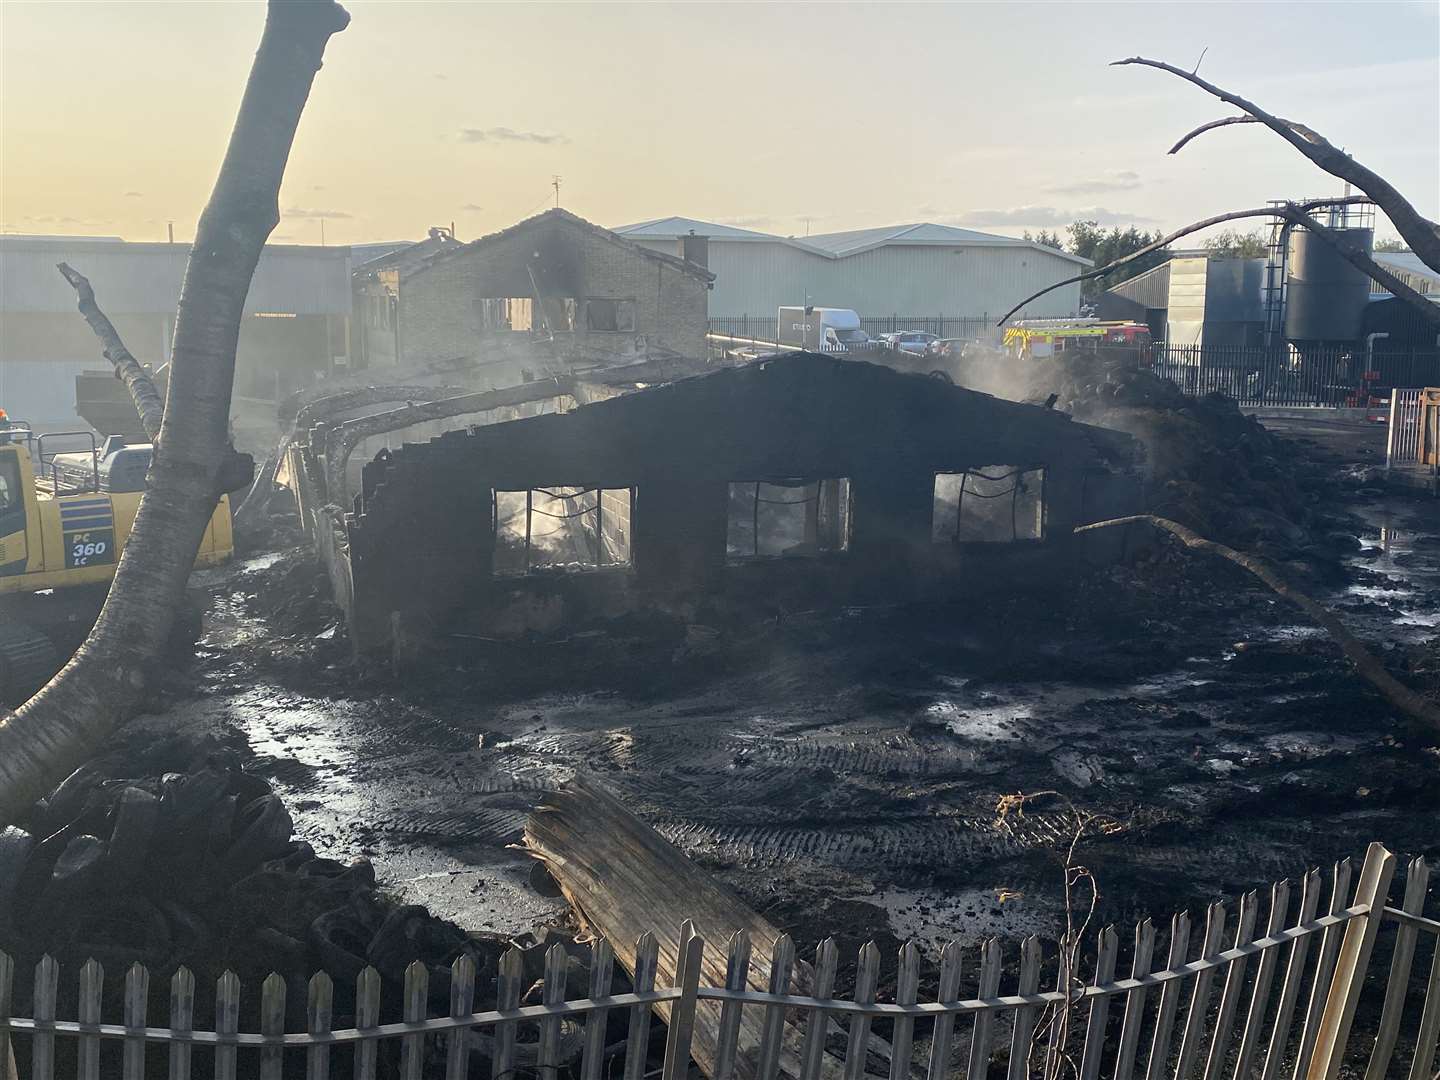 The LMR Tyre Recycling site looks otherworldly after the blaze. Picture: Steve Salter